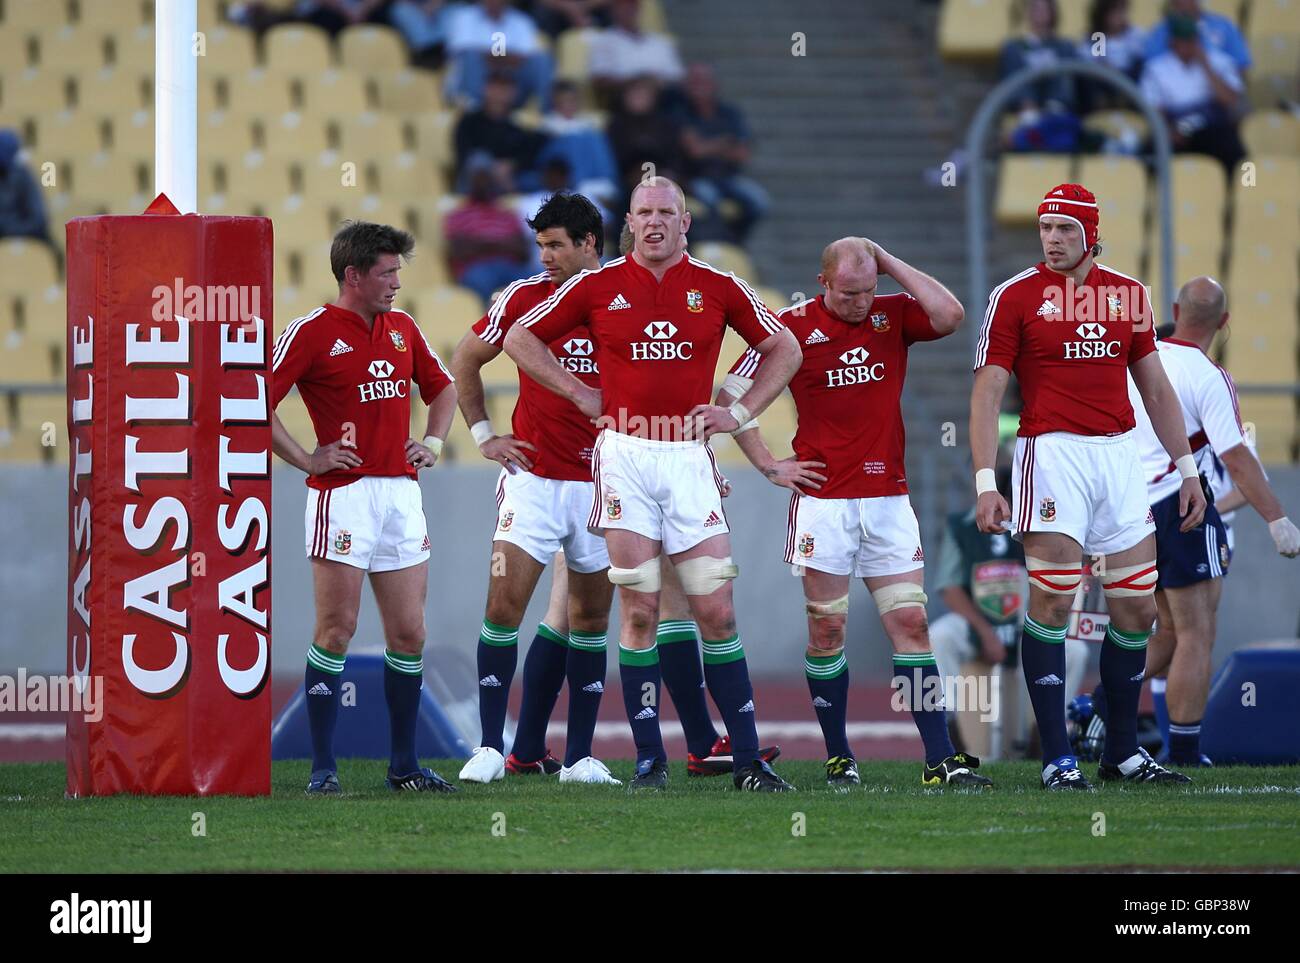 British and Irish Lion's Ronana O'Gara (left), Mike Phillips, Paul O'Connell, Martyn Williams and Alun-Wyn Jones (right) stand on their touchline as they await the decision from the TV replay Stock Photo